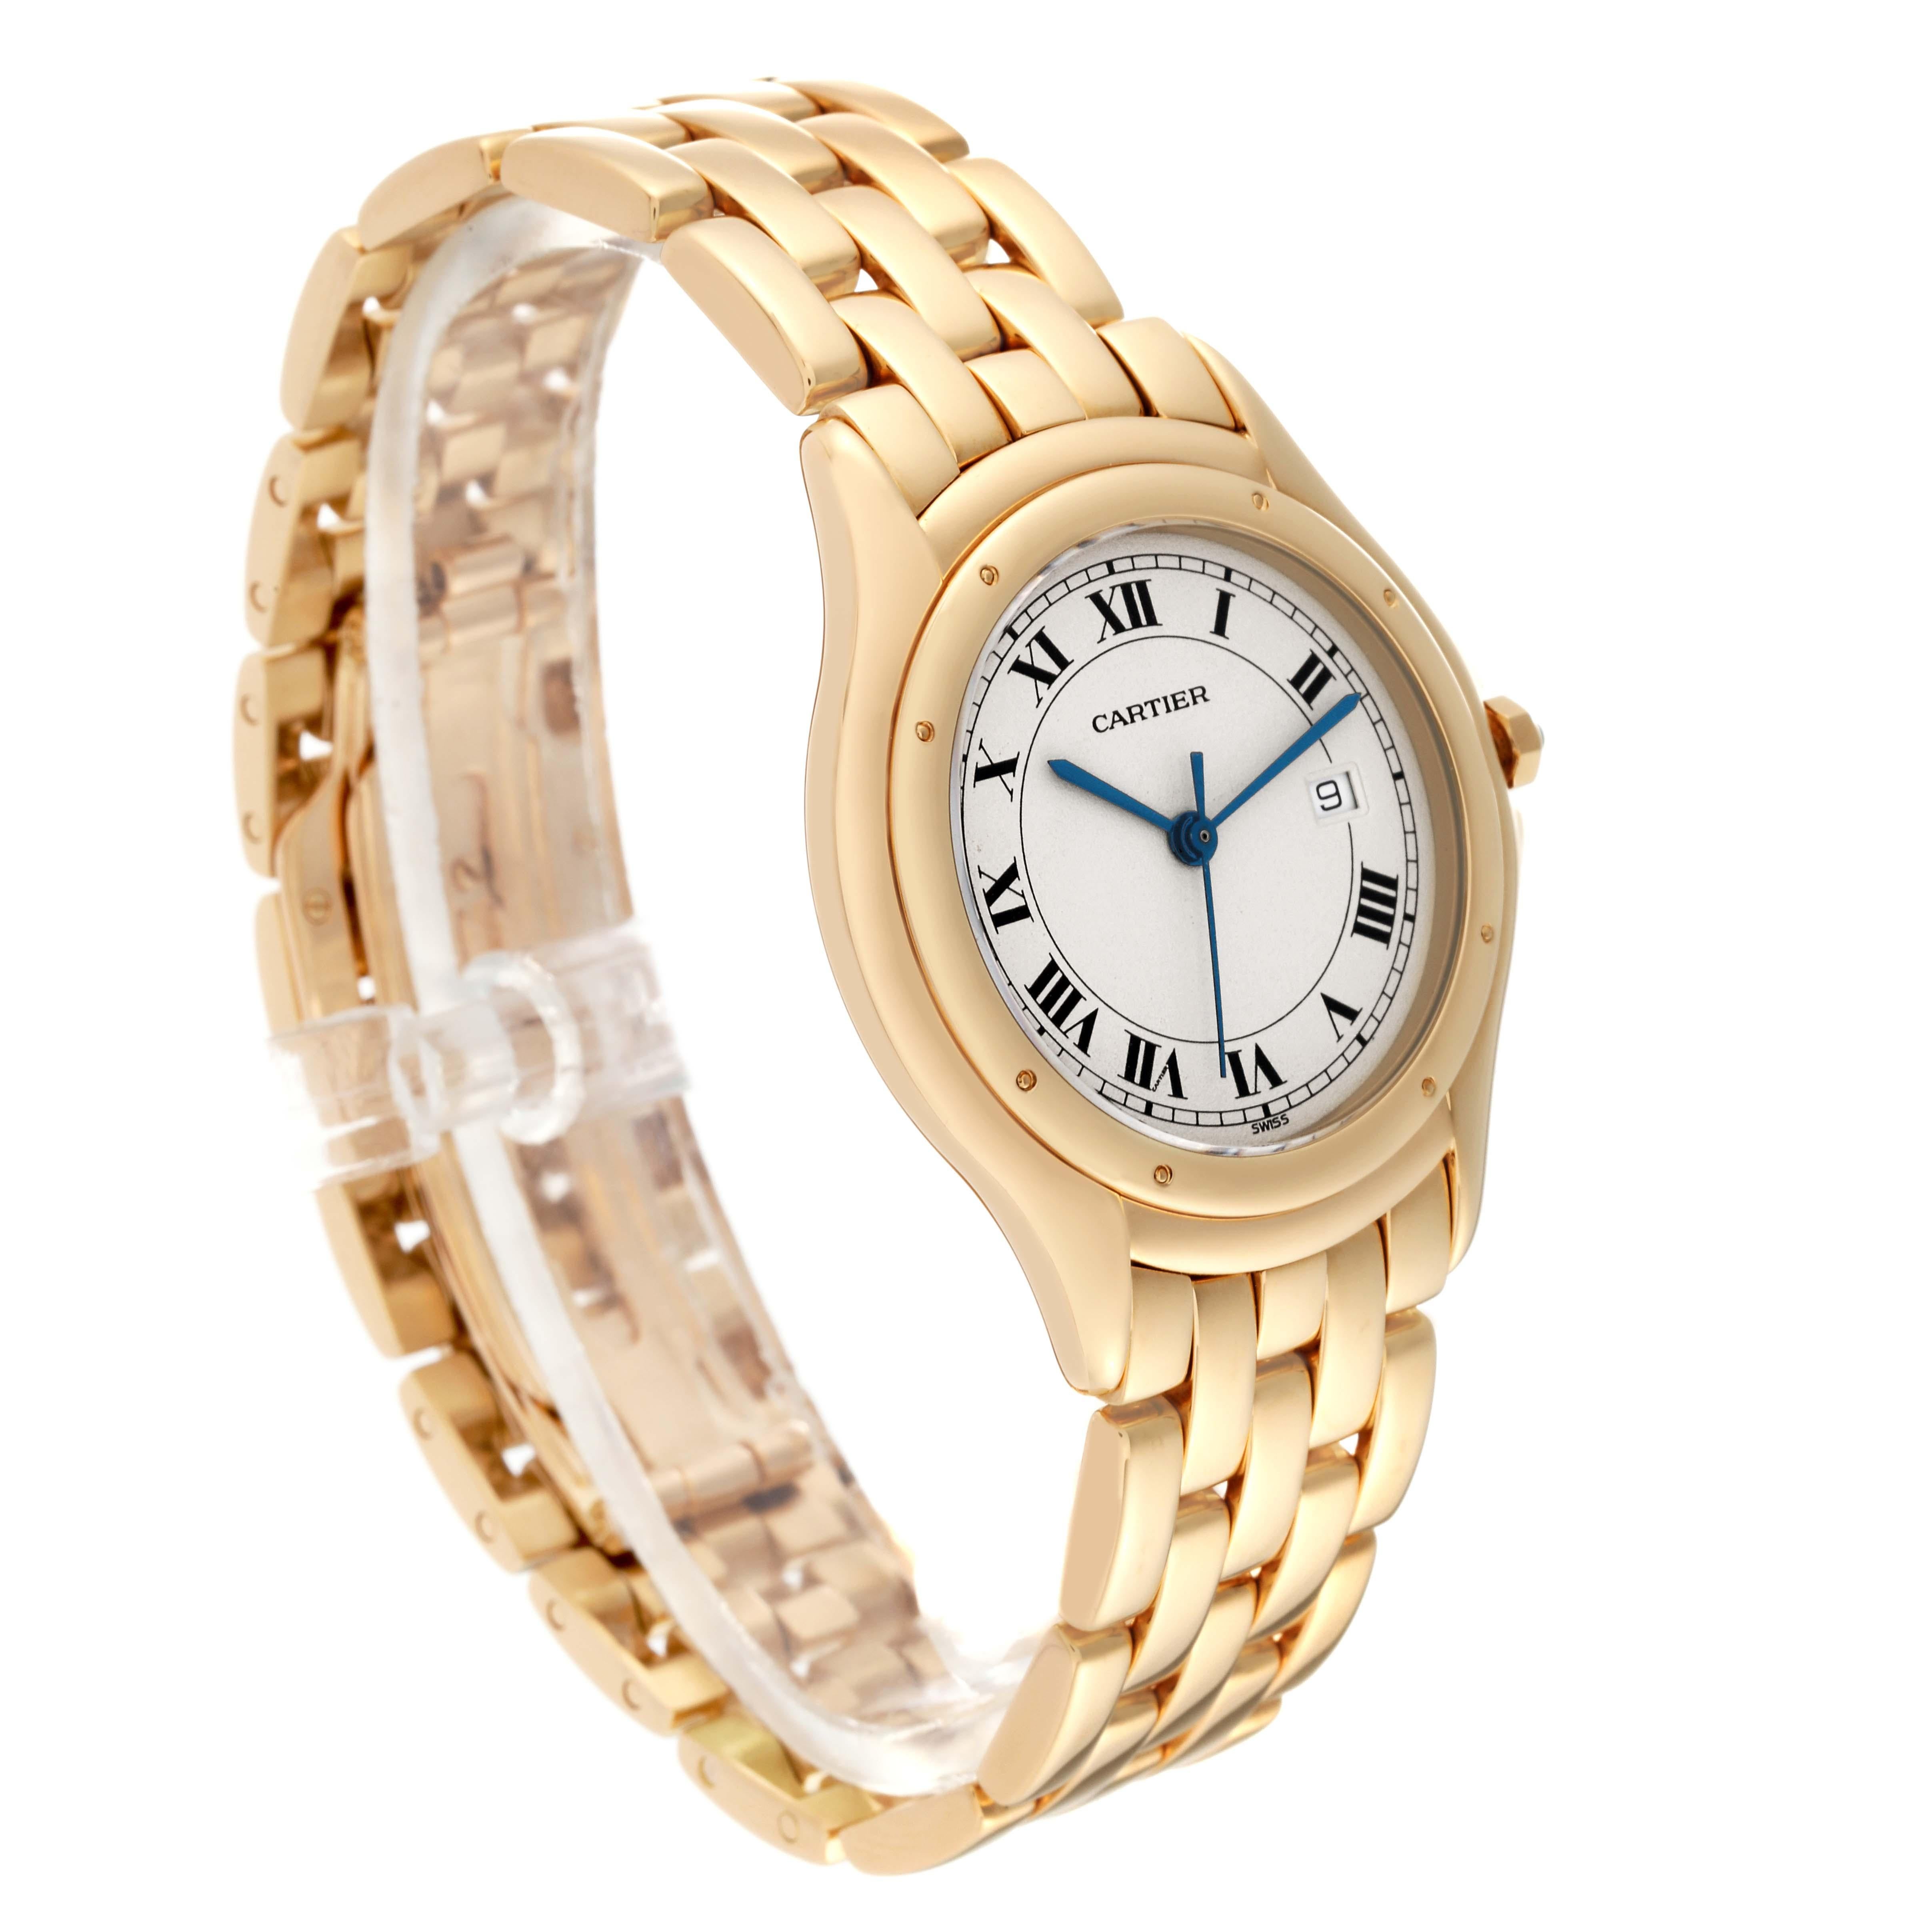 Cartier Cougar Yellow Gold Silver Dial Ladies Watch 887904 For Sale 2